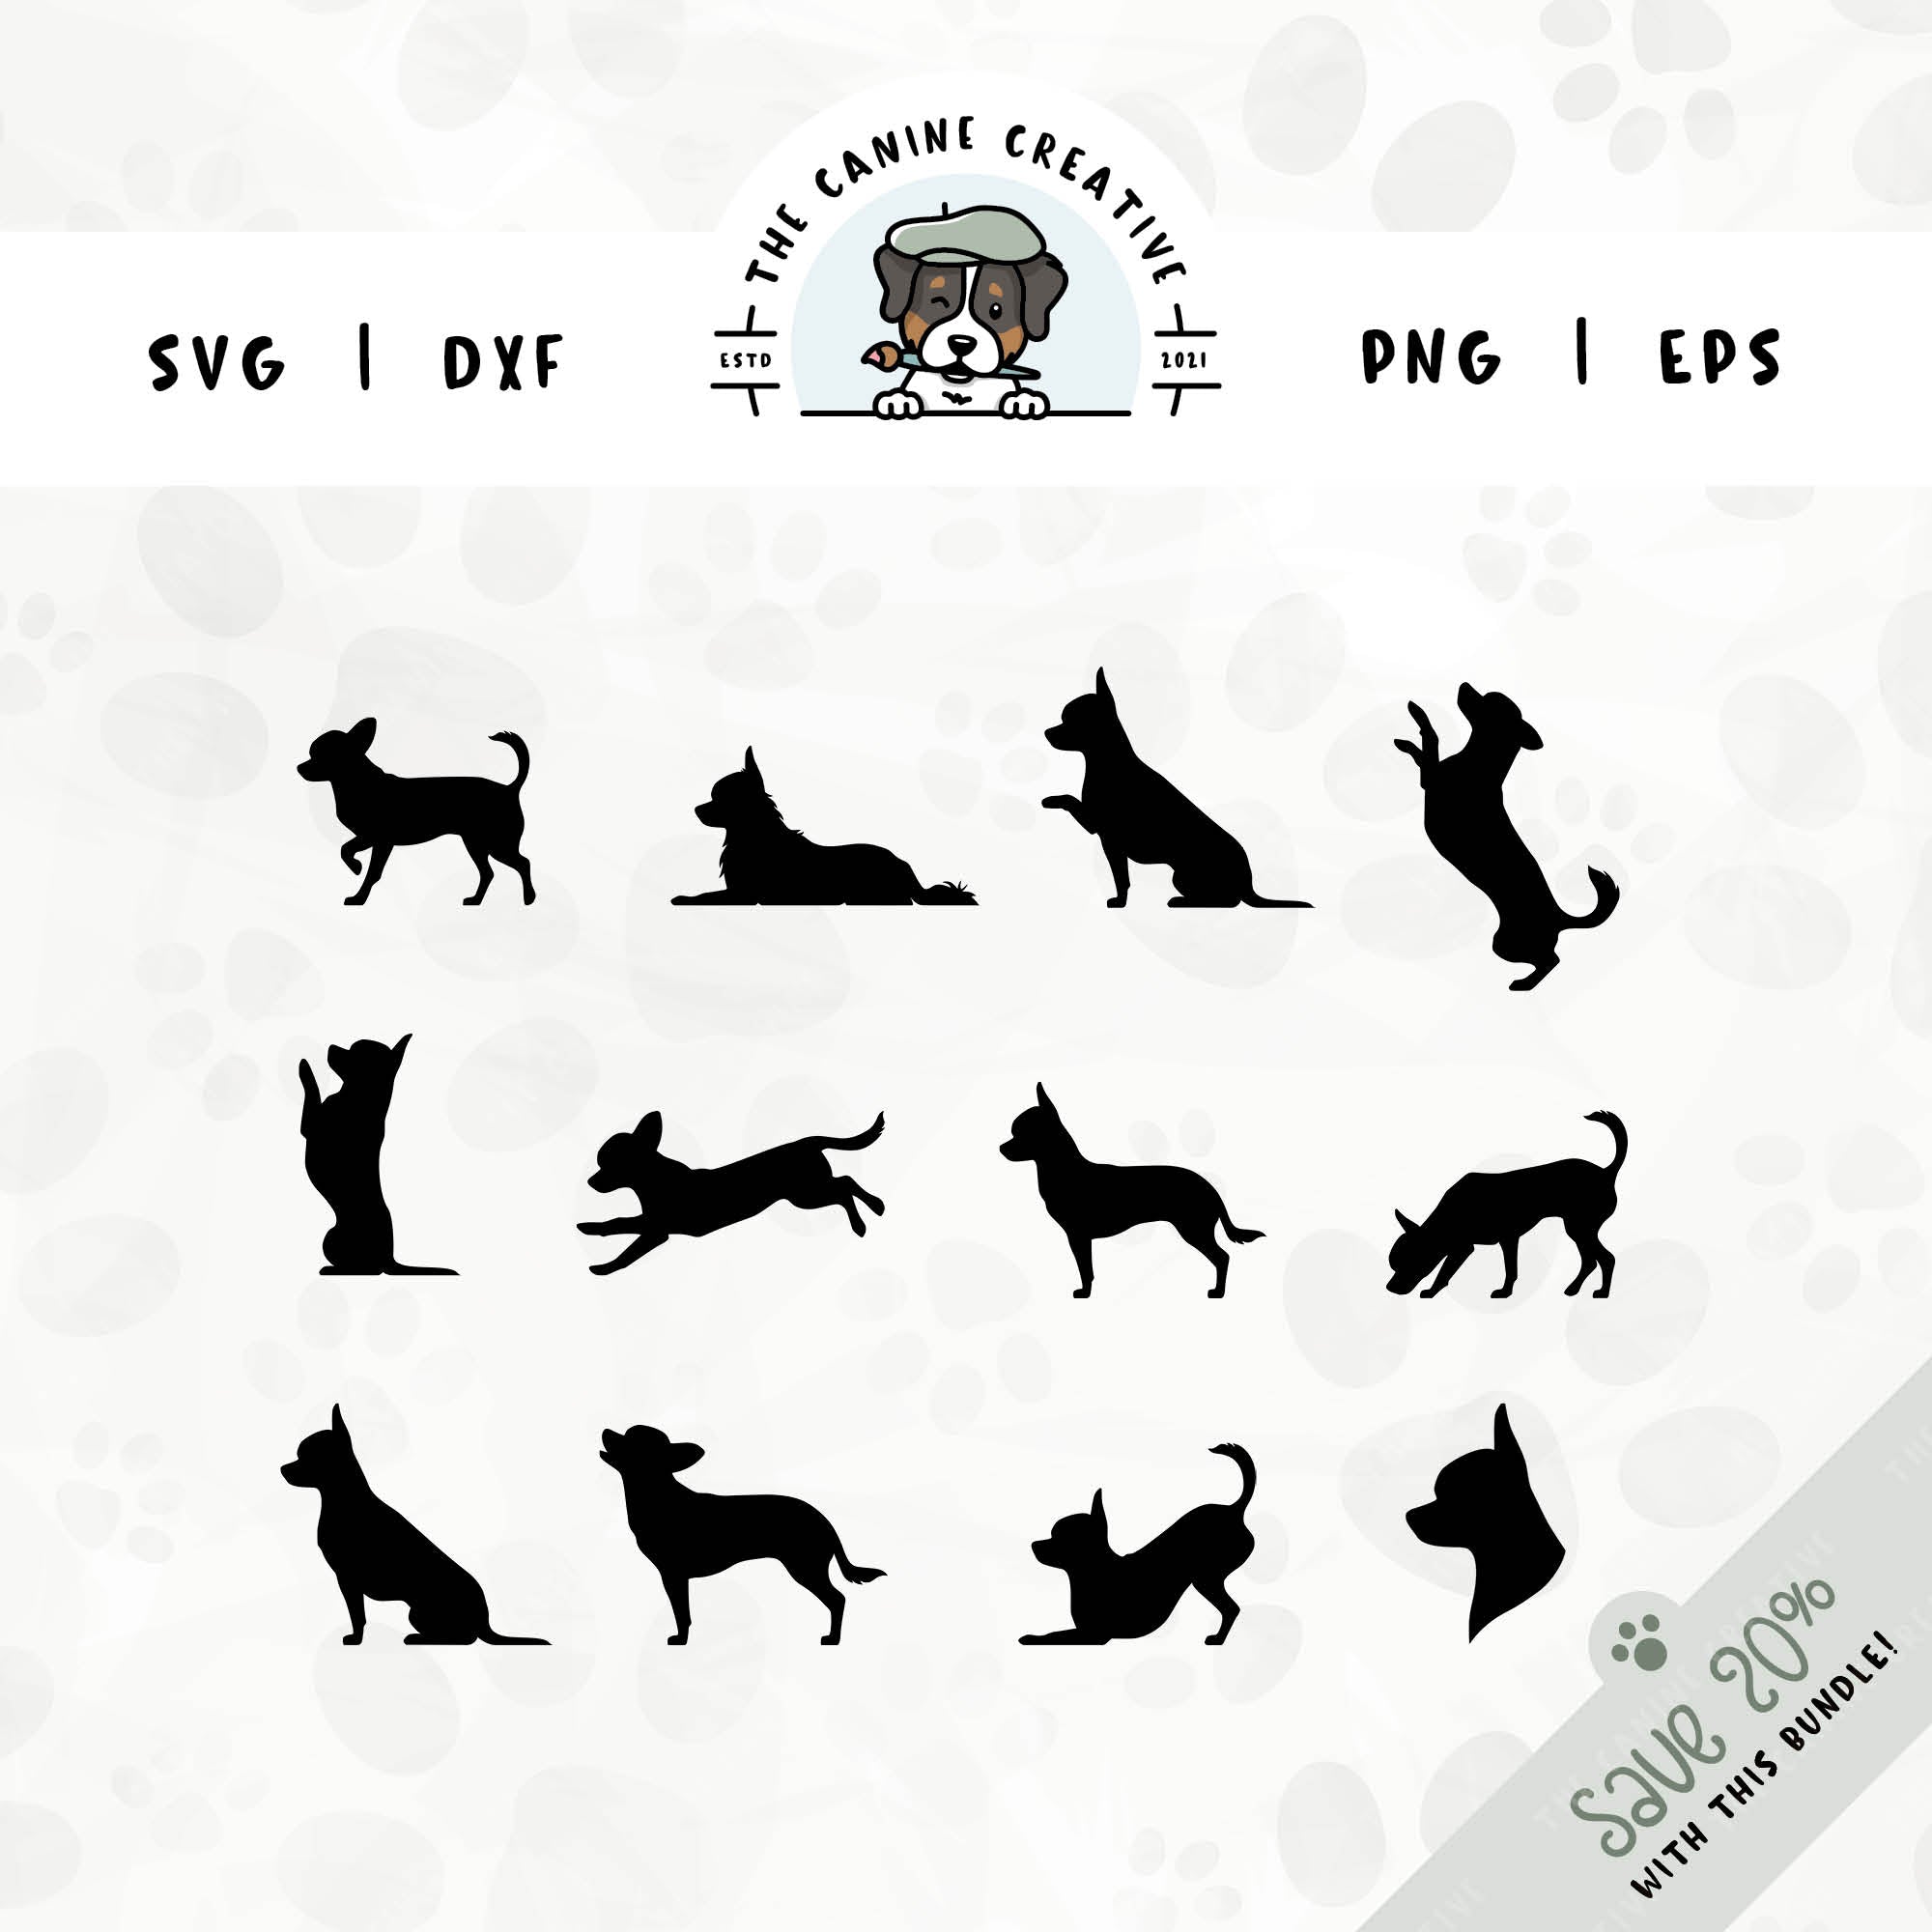 This 12-pack Smooth Coat Chihuahua silhouette bundle features a dog's head in profile, along with various poses including running, laying down, playing, standing, sitting, walking, jumping up, begging, barking, sniffing, and shaking a paw. File formats include: SVG, DXF, PNG, and EPS.